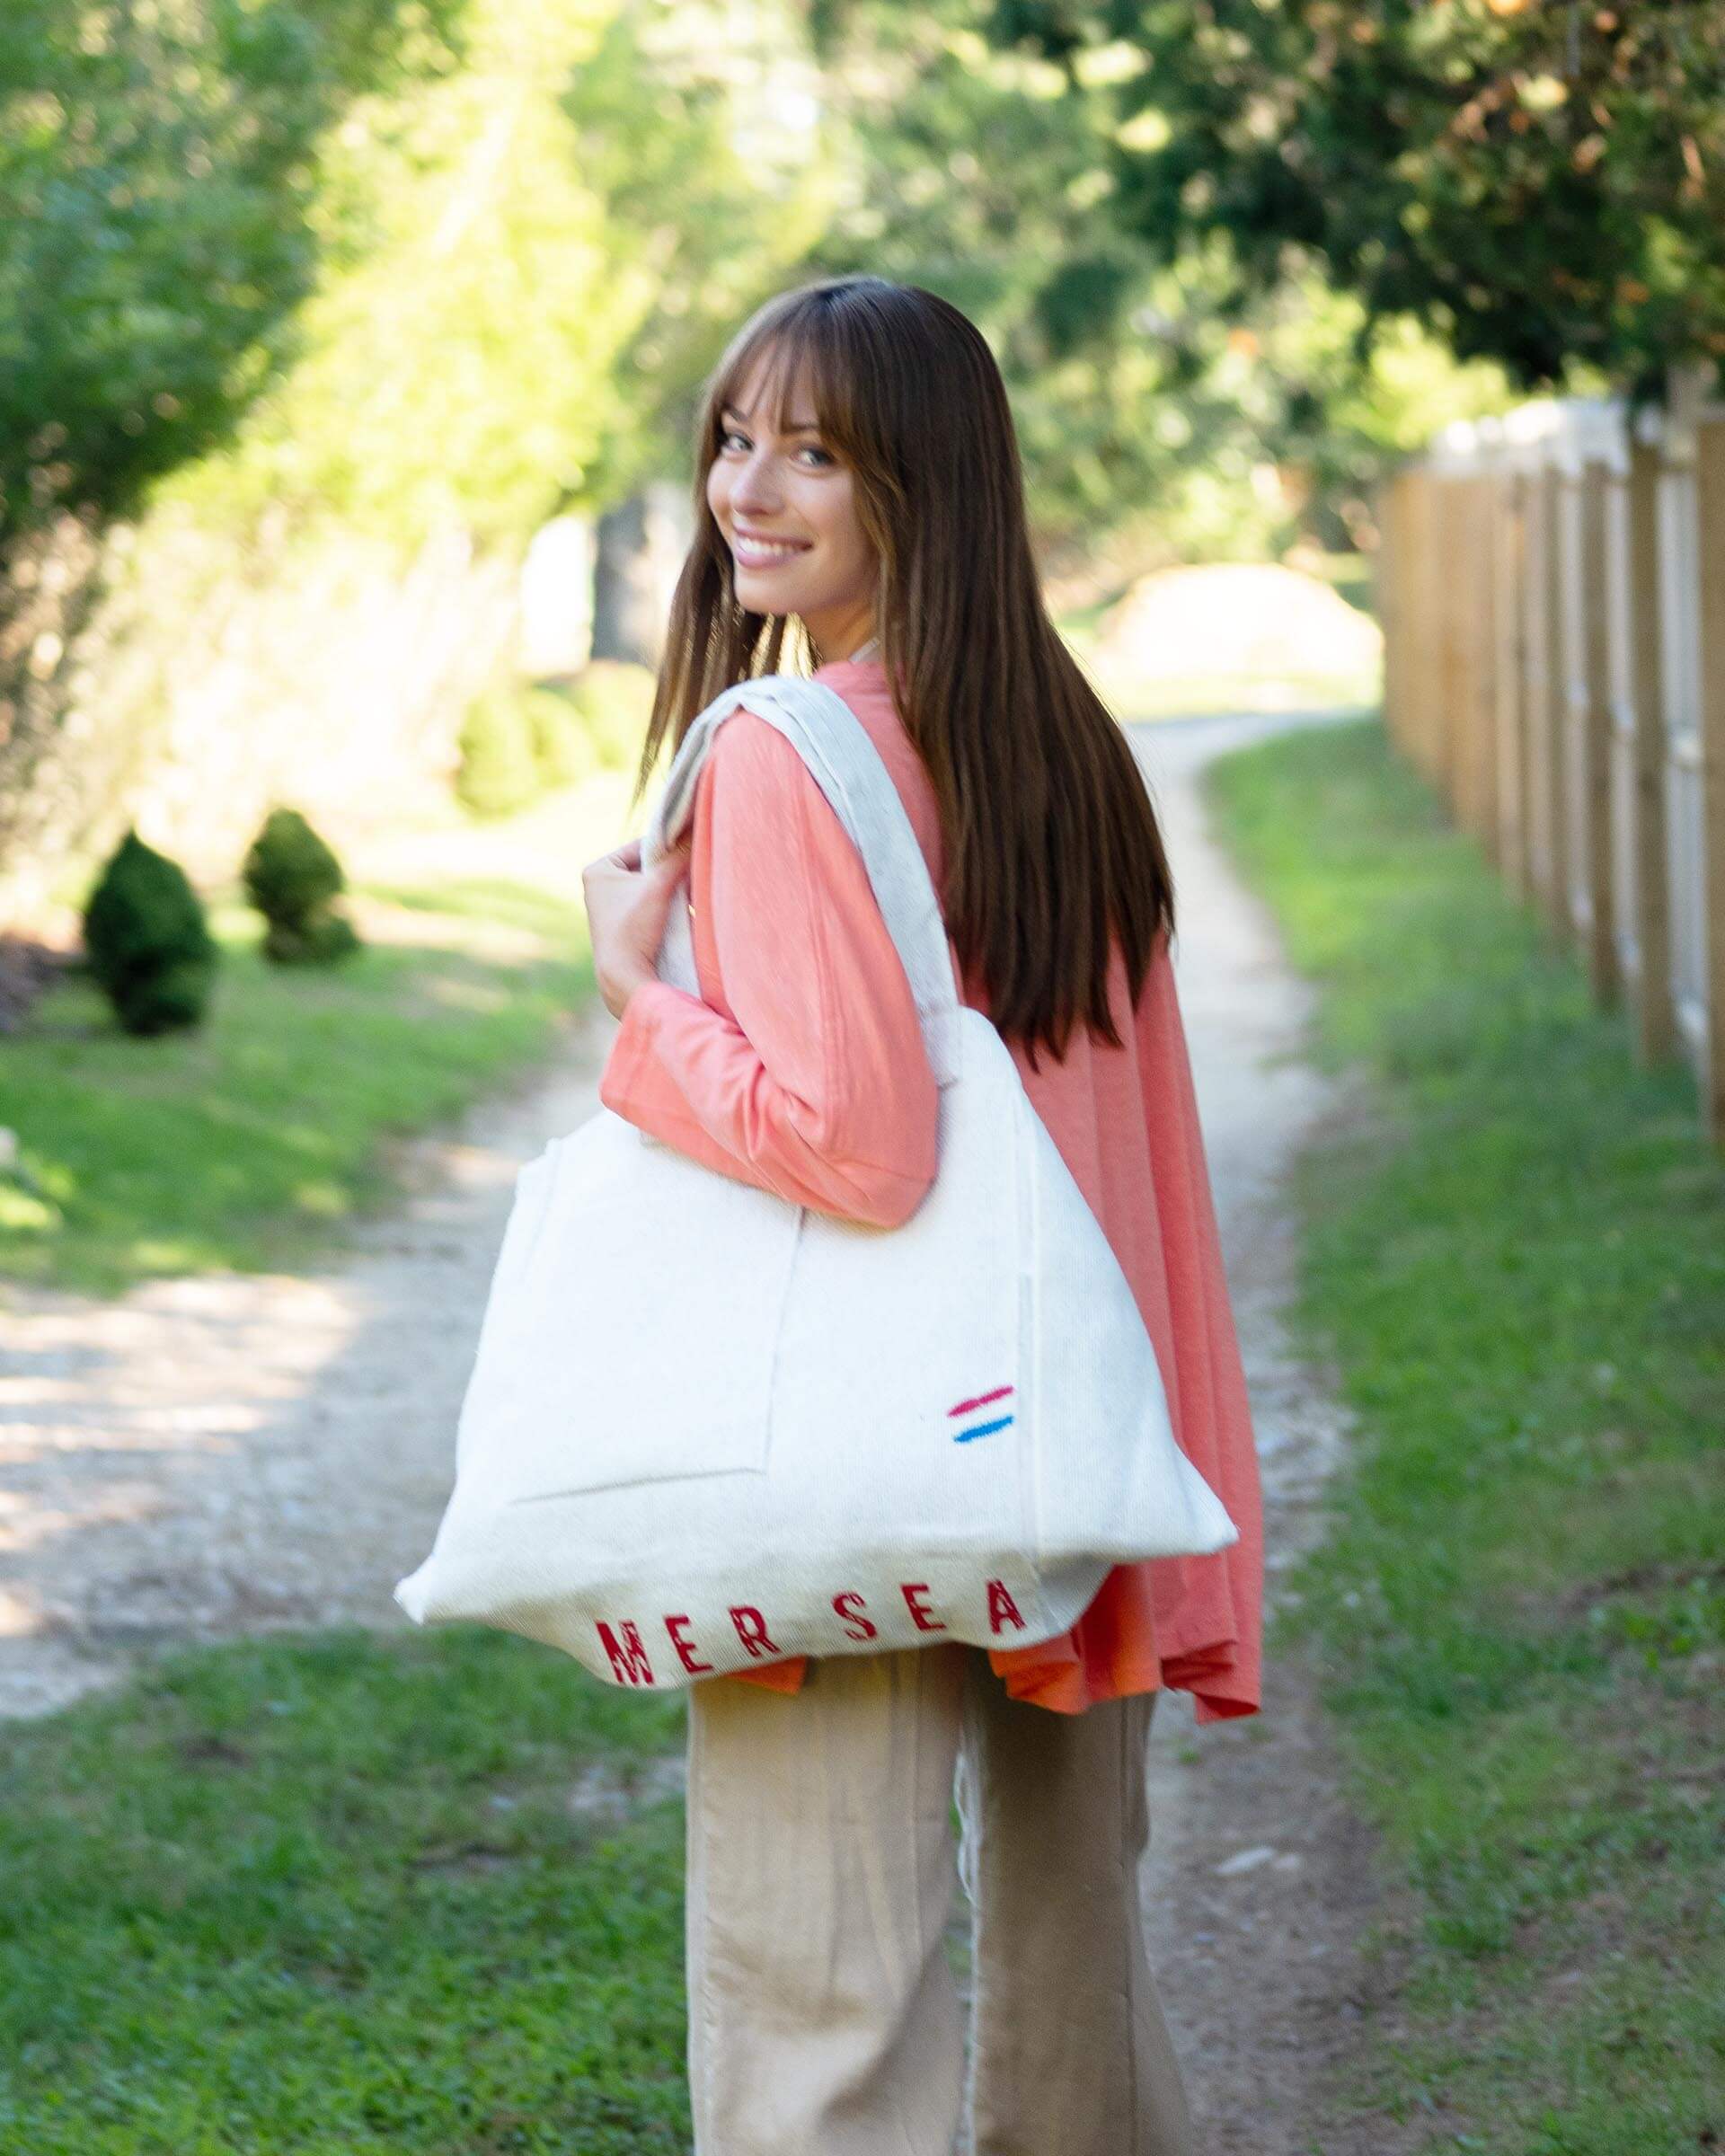 female wearing large white MERSEA labeled tote bag over one shoulder walking outside near a fence 